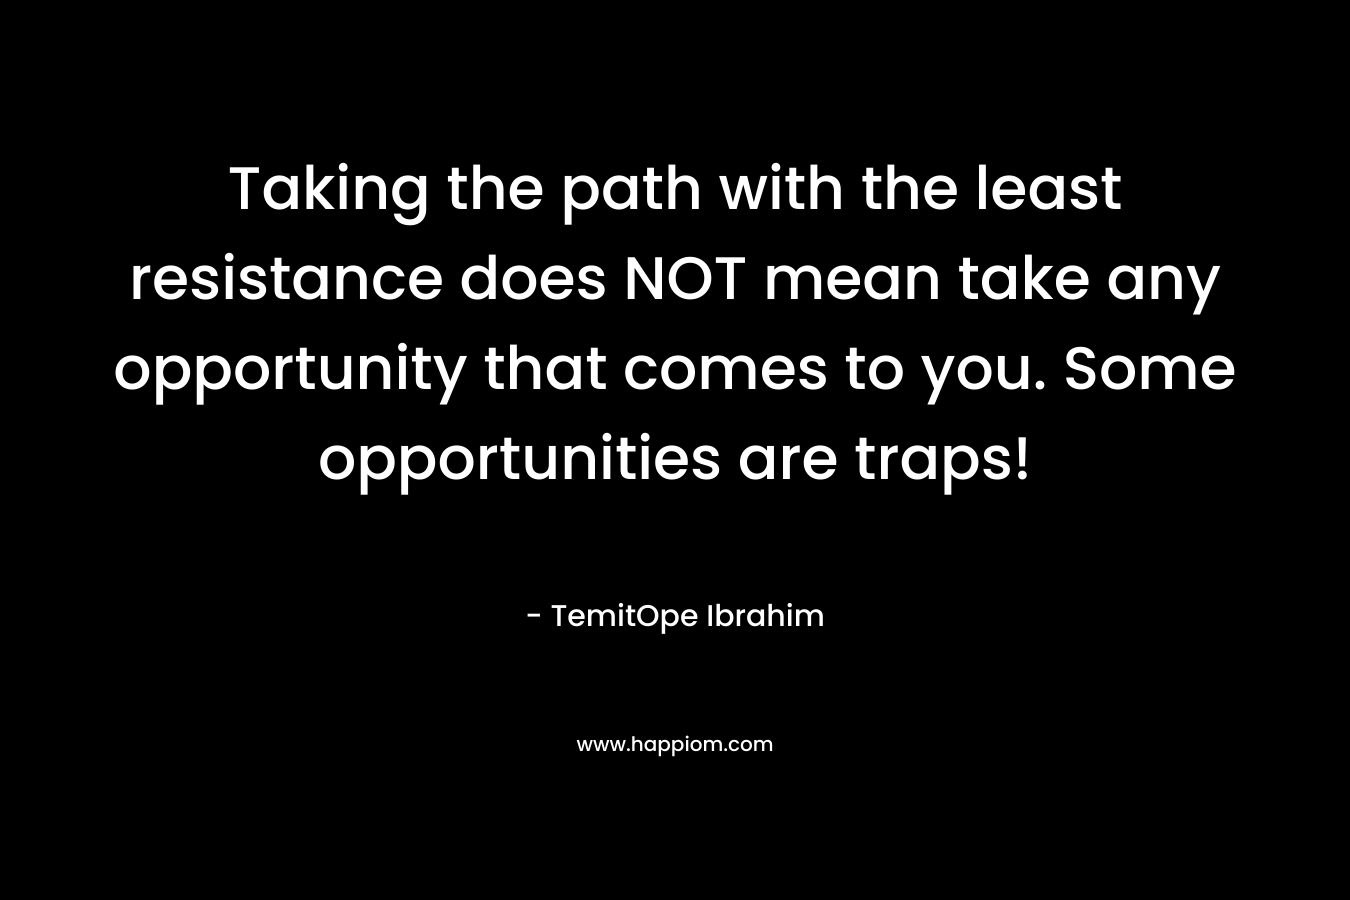 Taking the path with the least resistance does NOT mean take any opportunity that comes to you. Some opportunities are traps! – TemitOpe Ibrahim